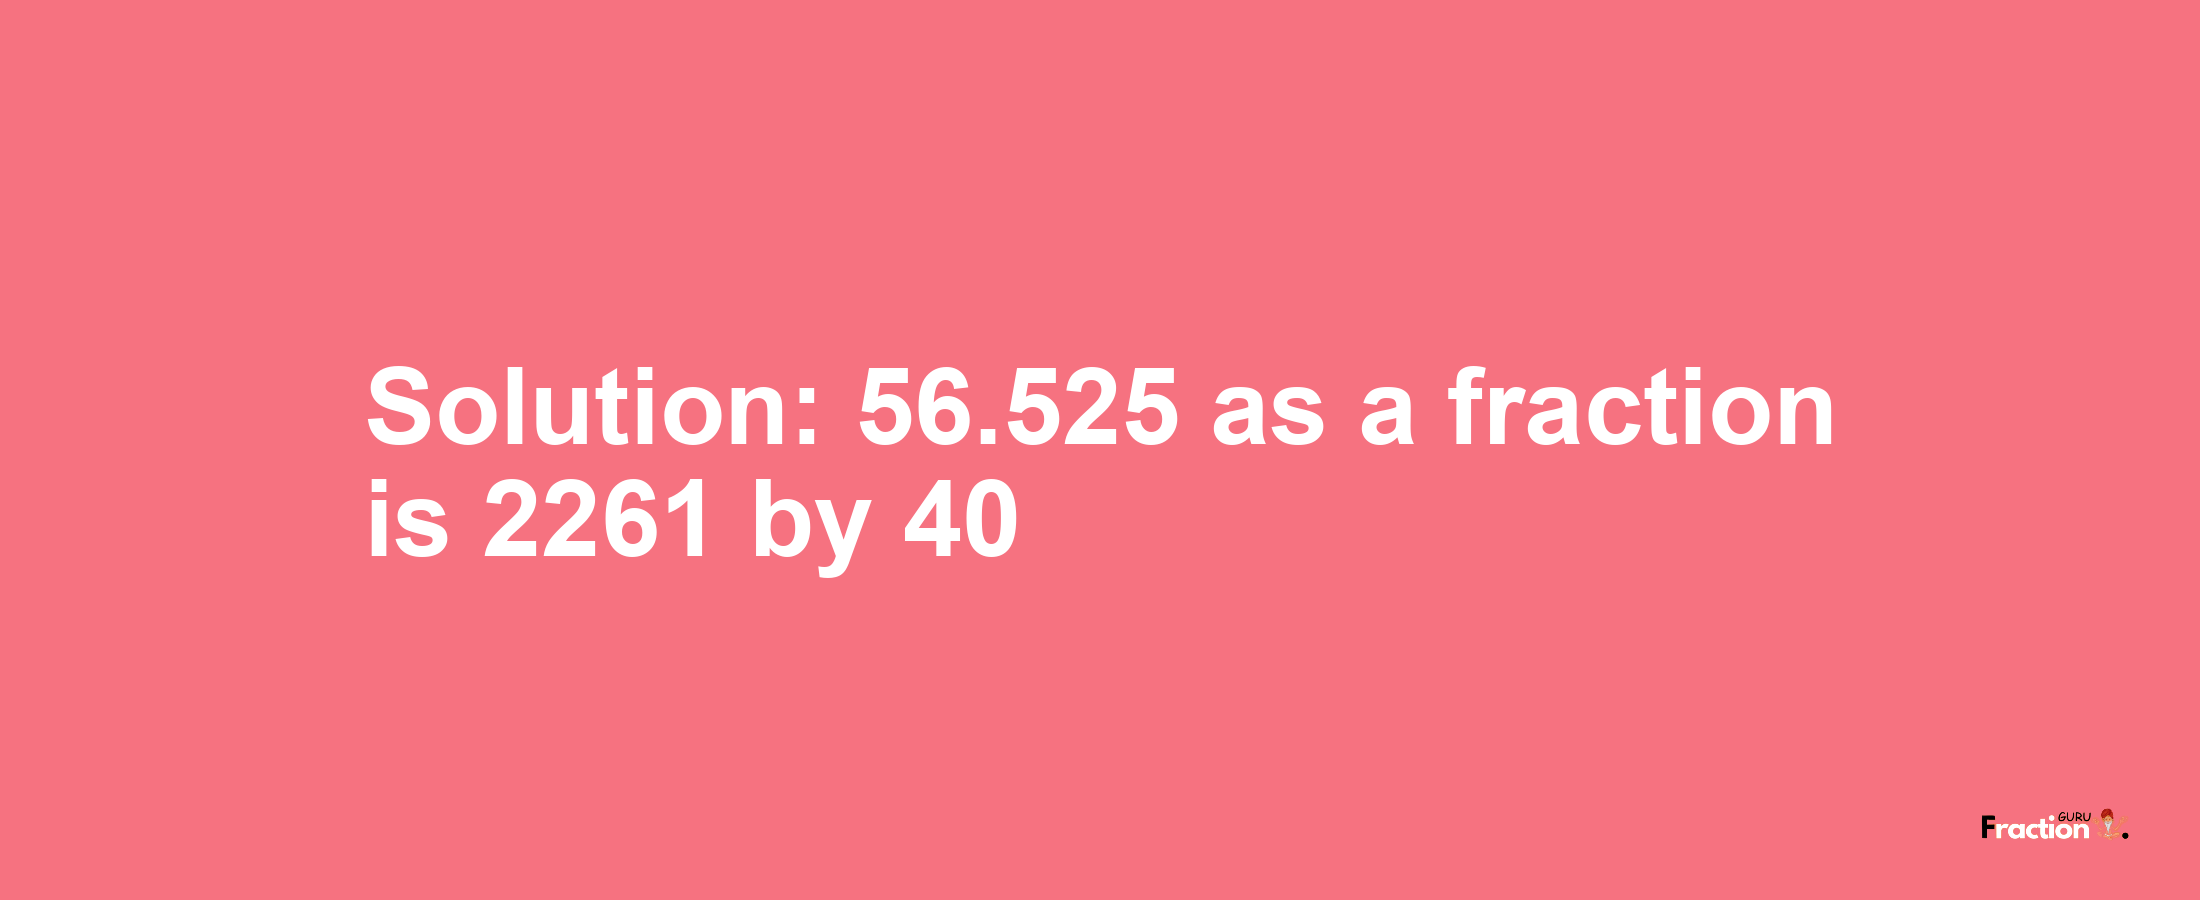 Solution:56.525 as a fraction is 2261/40